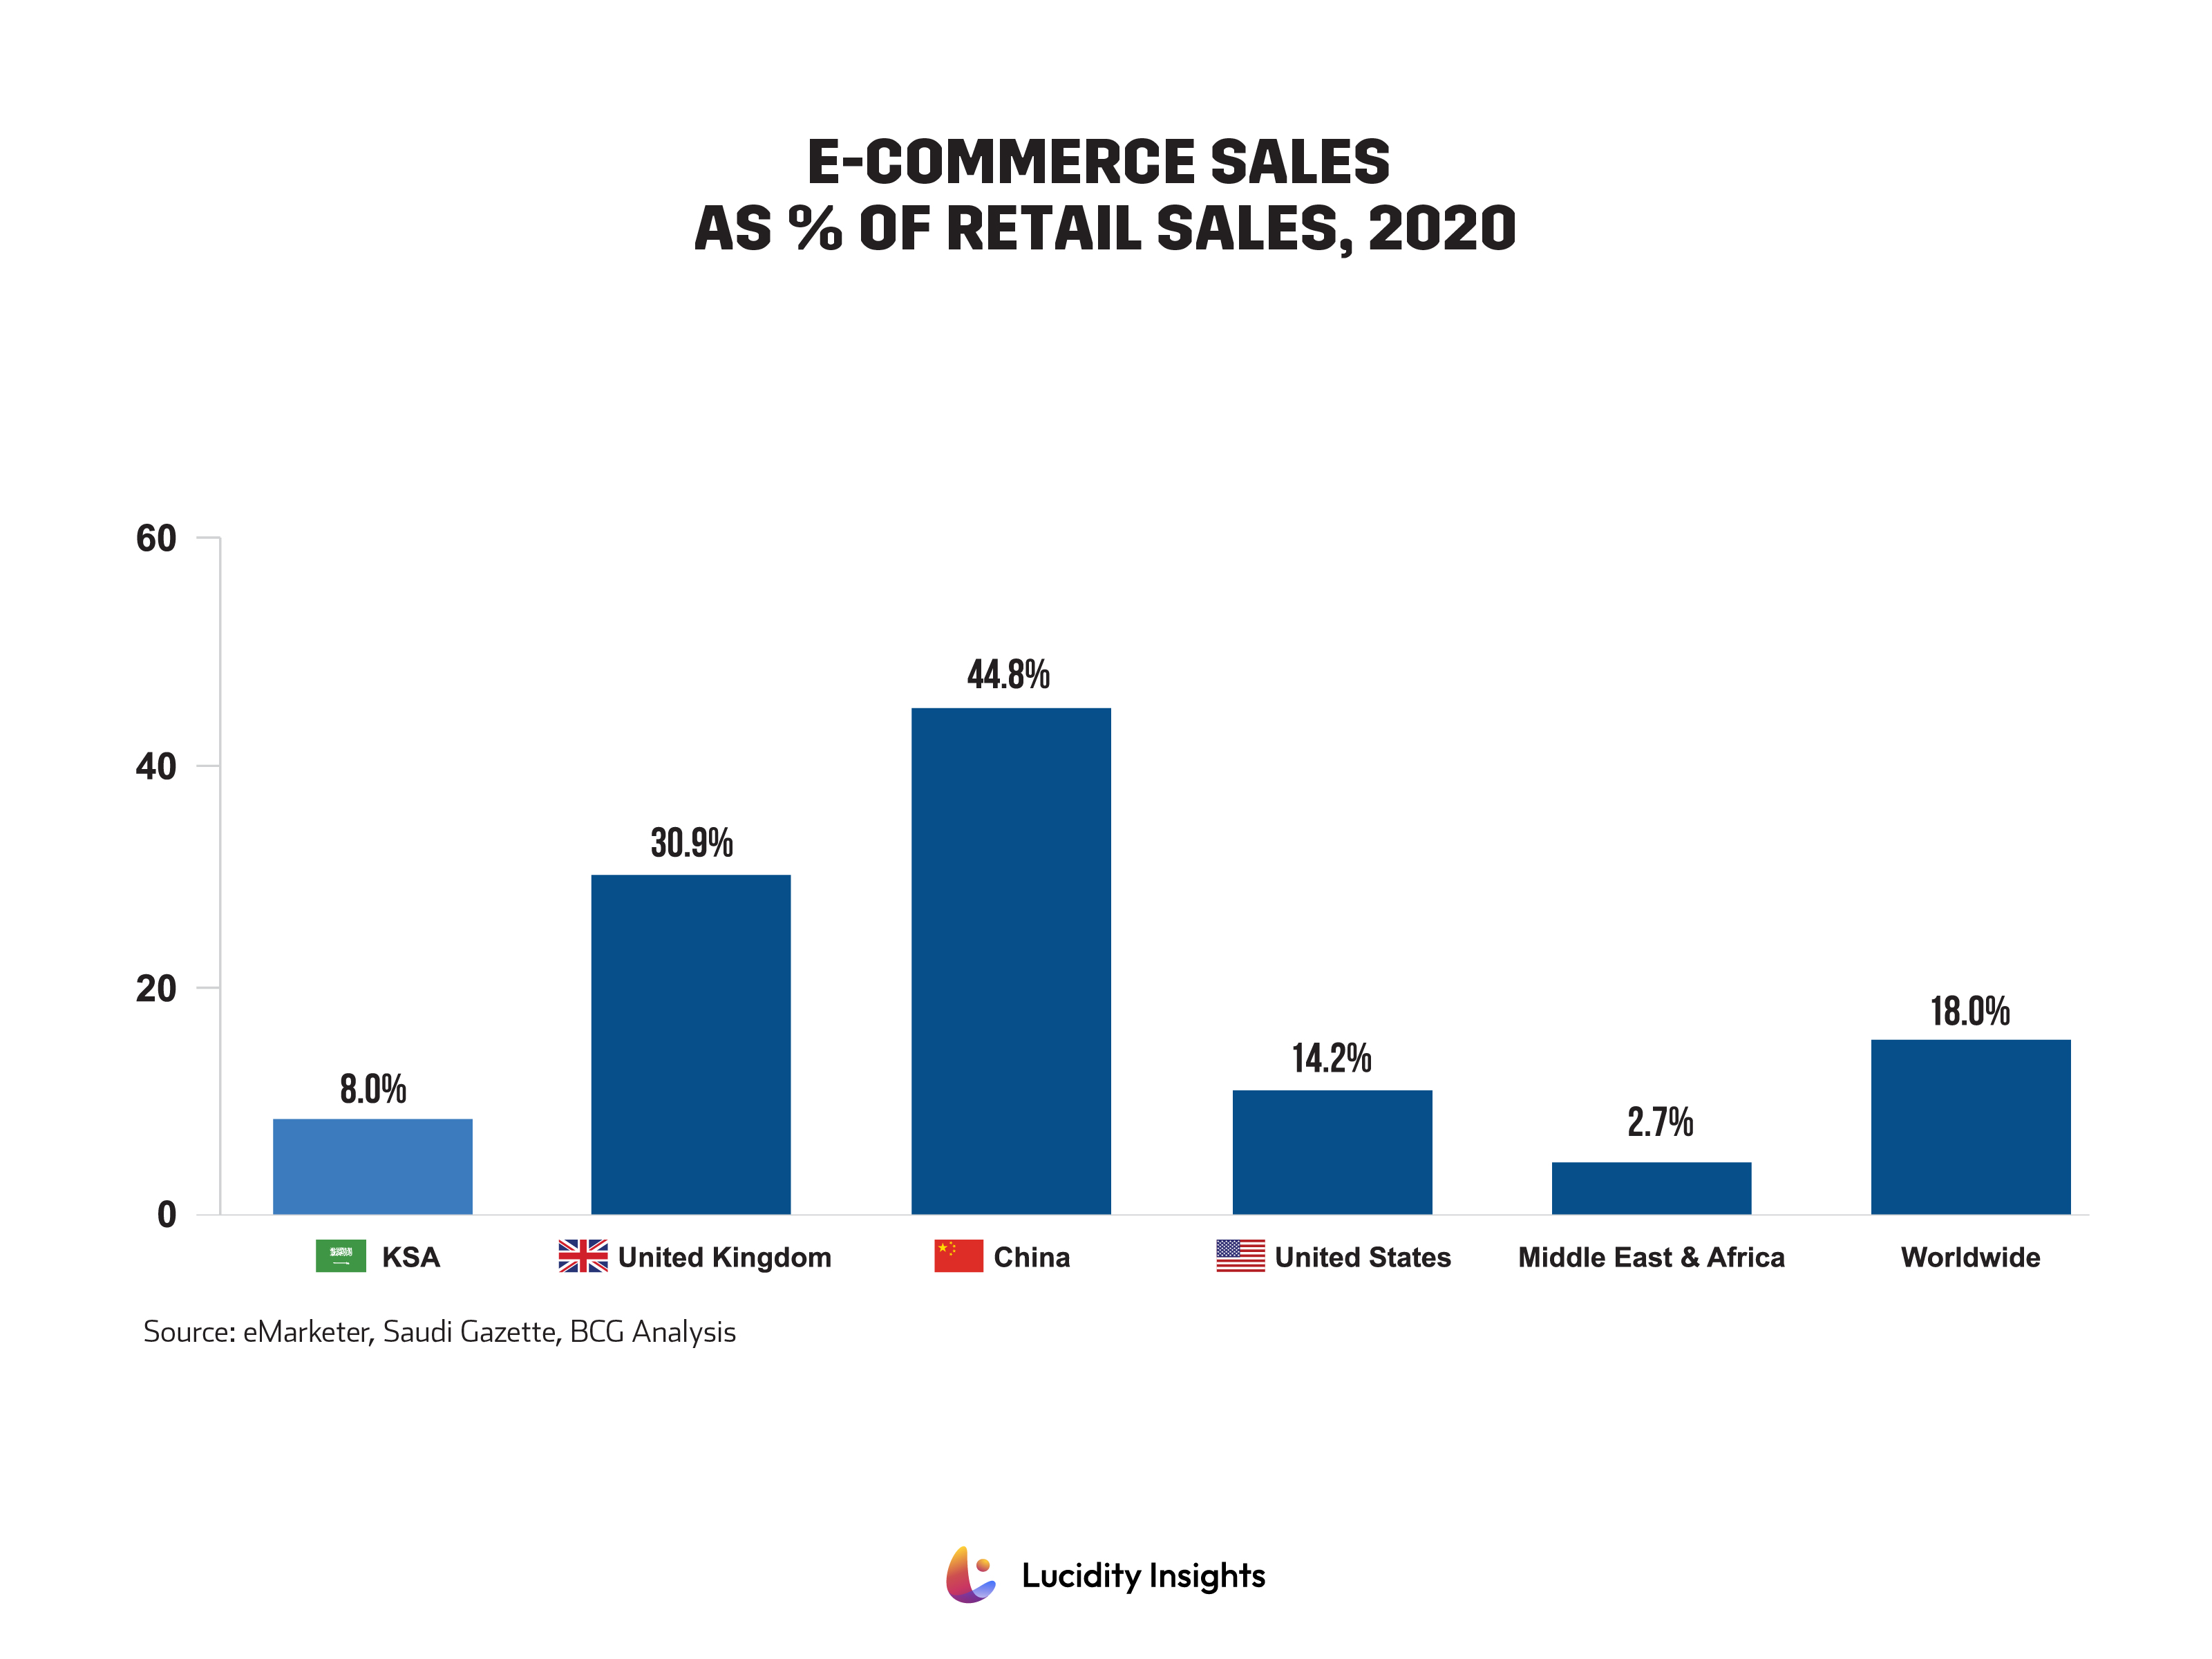 KSA E-Commerce Sales as % of Retail Sales in 2020, compared to Leading Countries